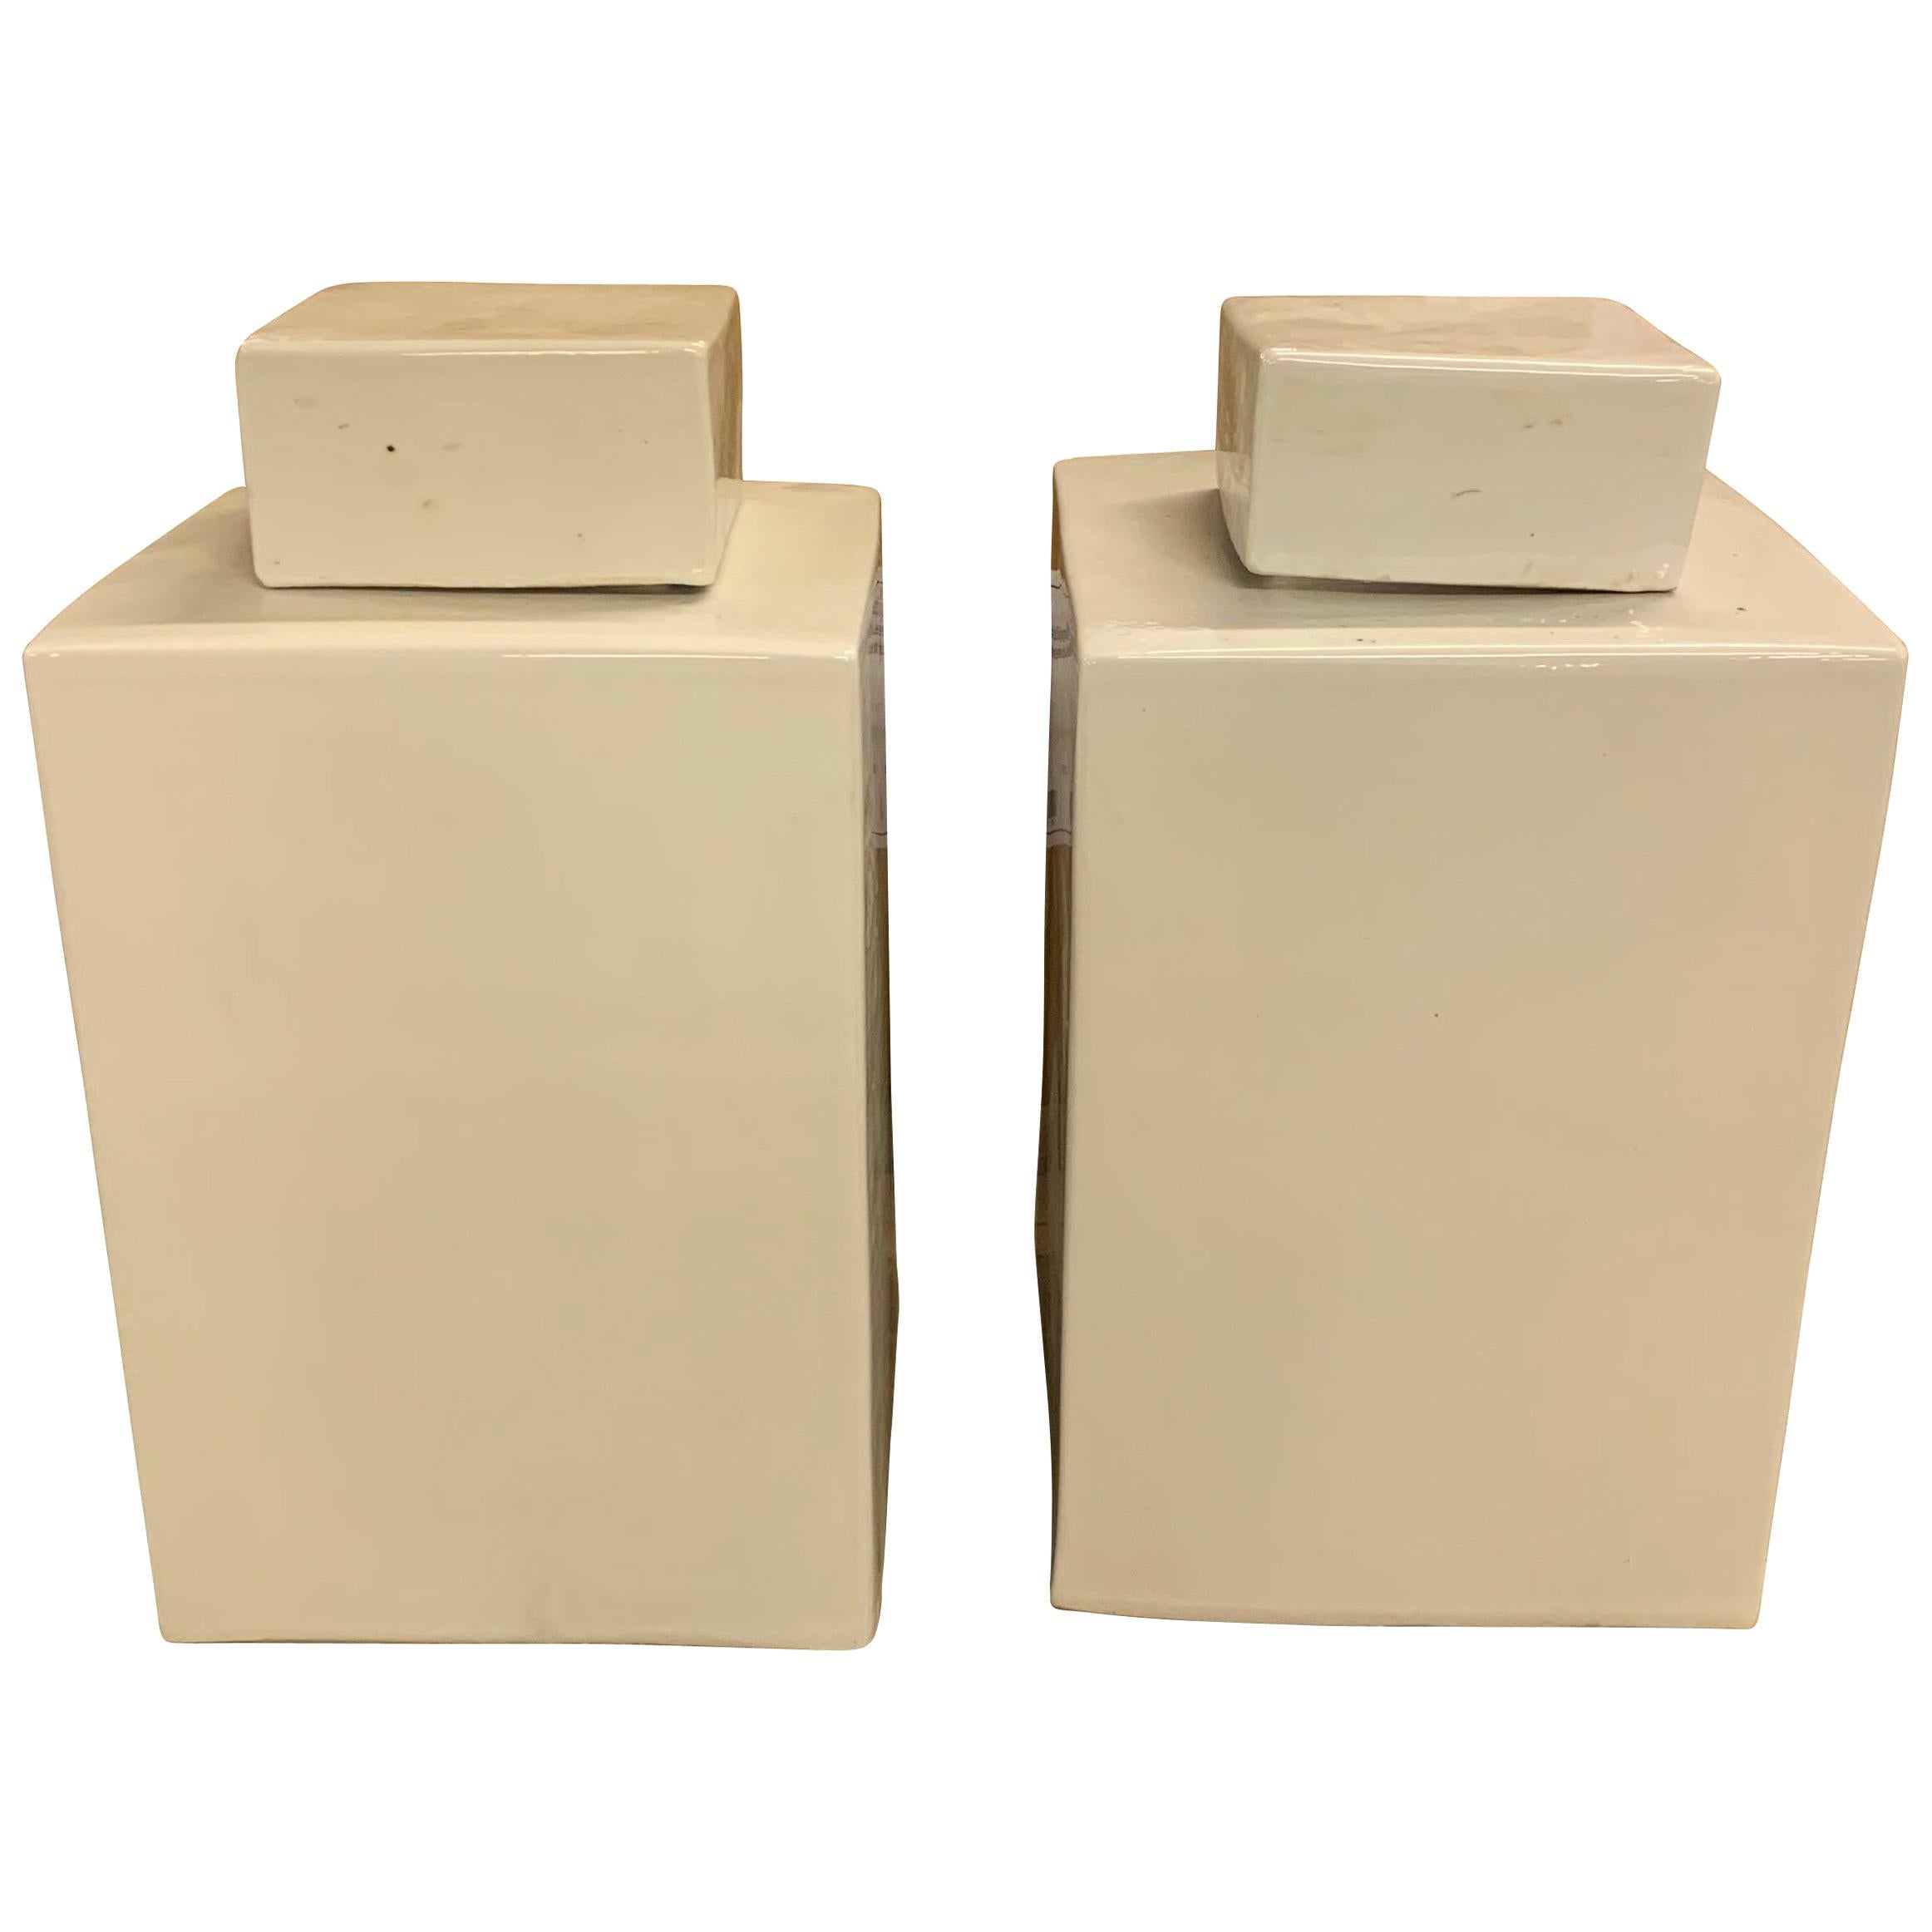 Pair of White Square Canisters, China, Contemporary